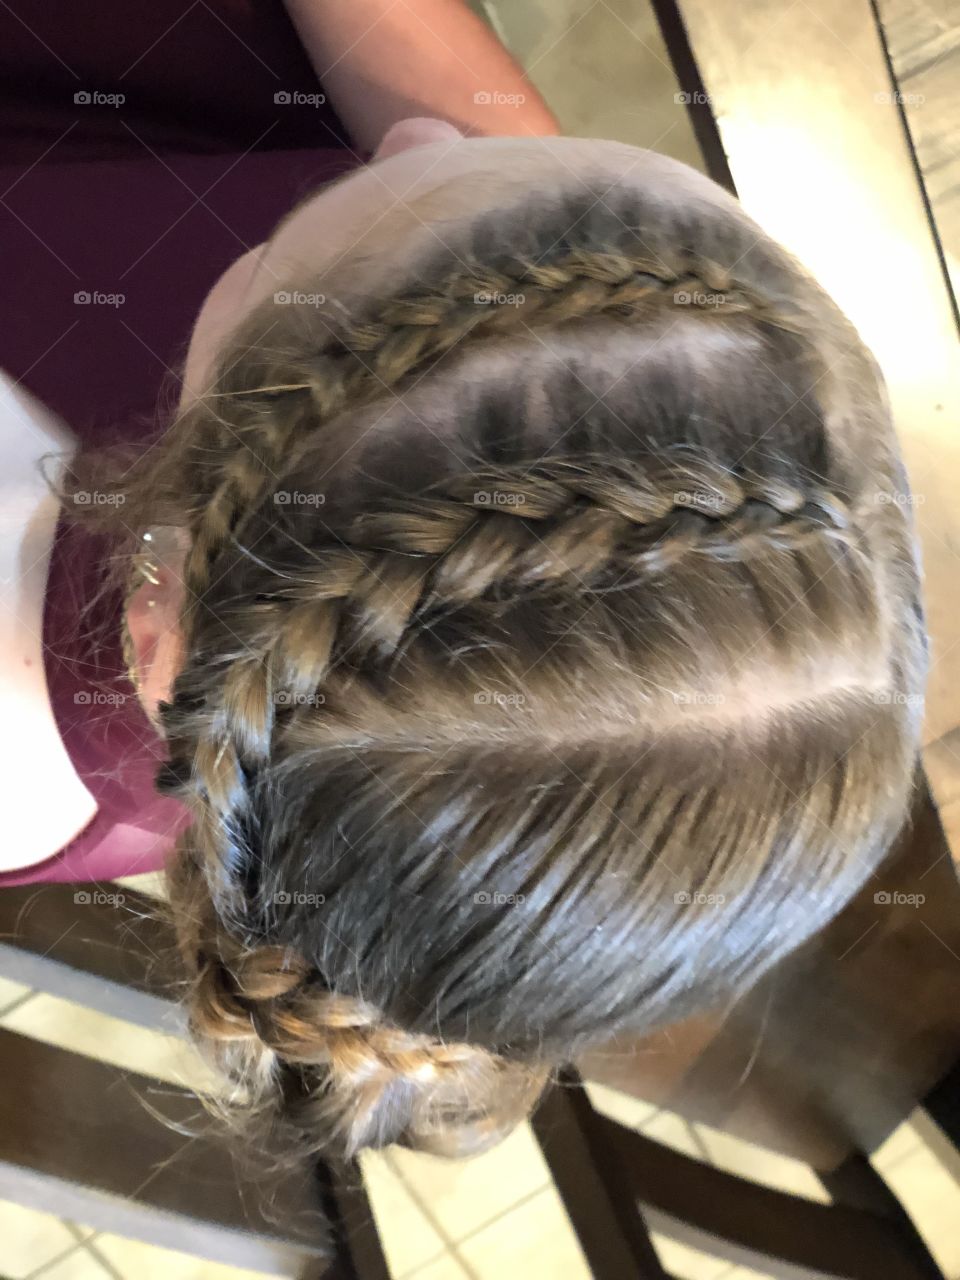 Hair model with multiple braids ready for prom